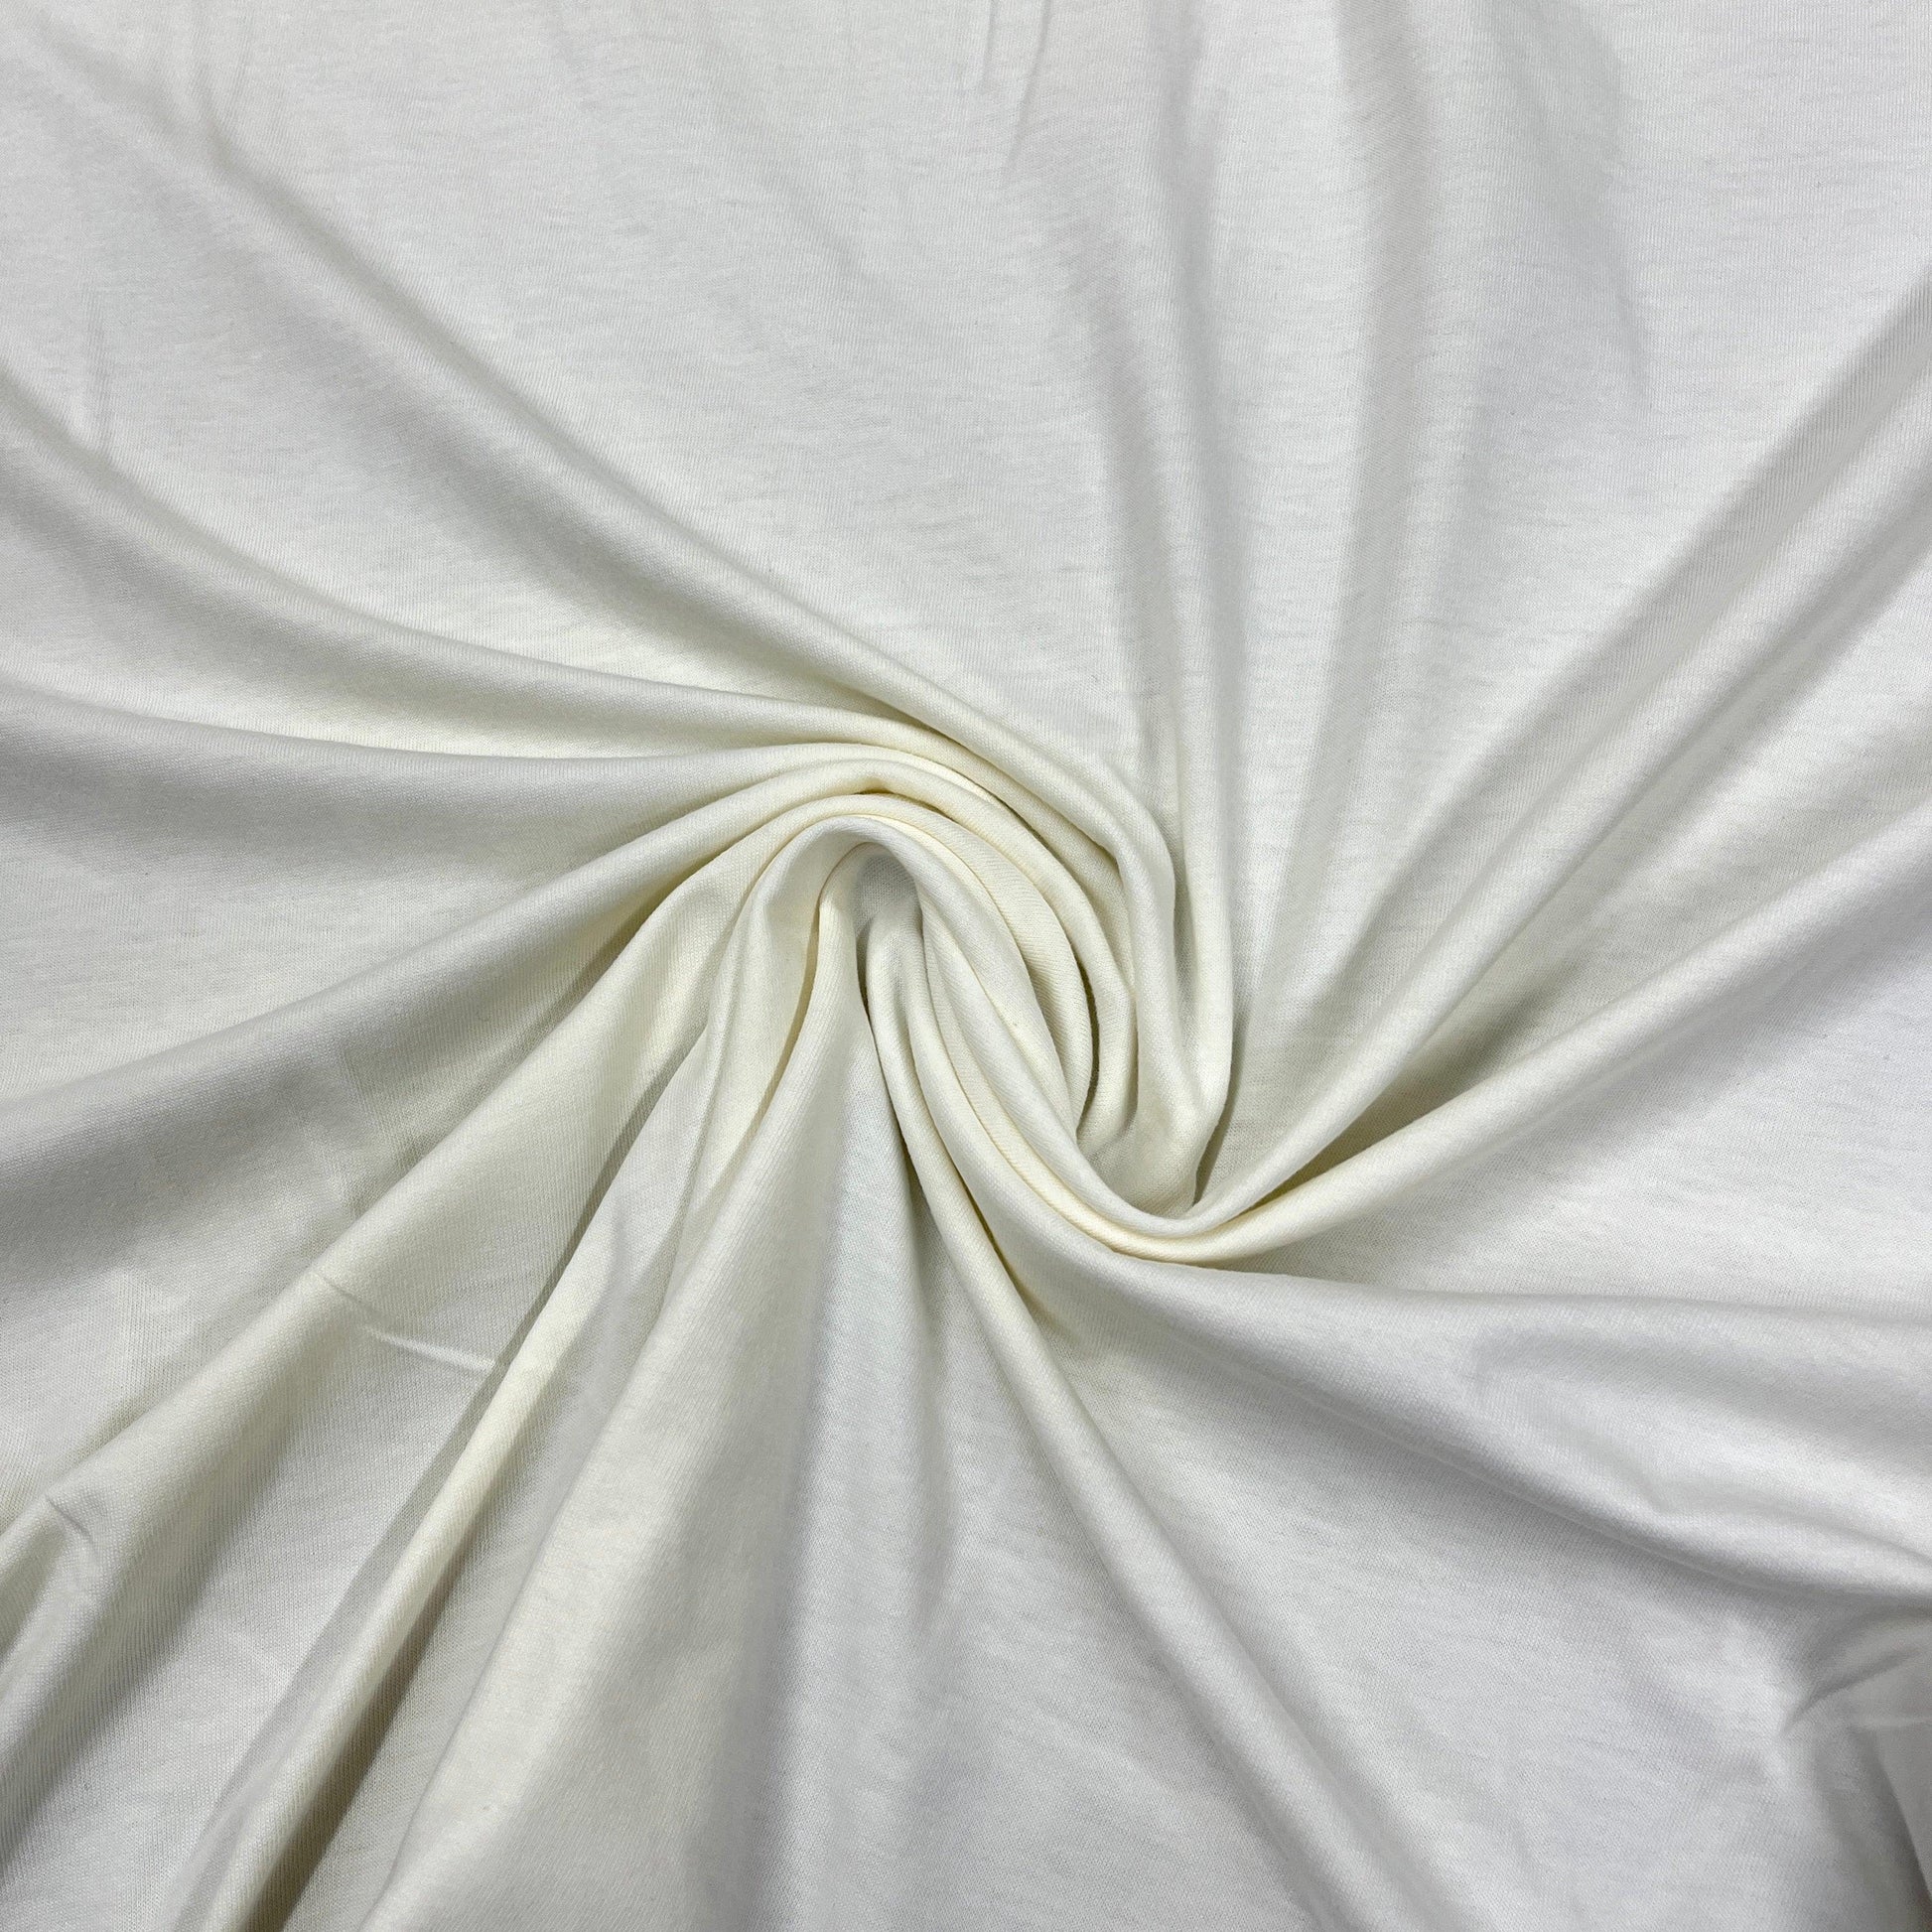 Off-White Organic Cotton Jersey Fabric- 200 GSM - Grown in the USA - Nature's Fabrics